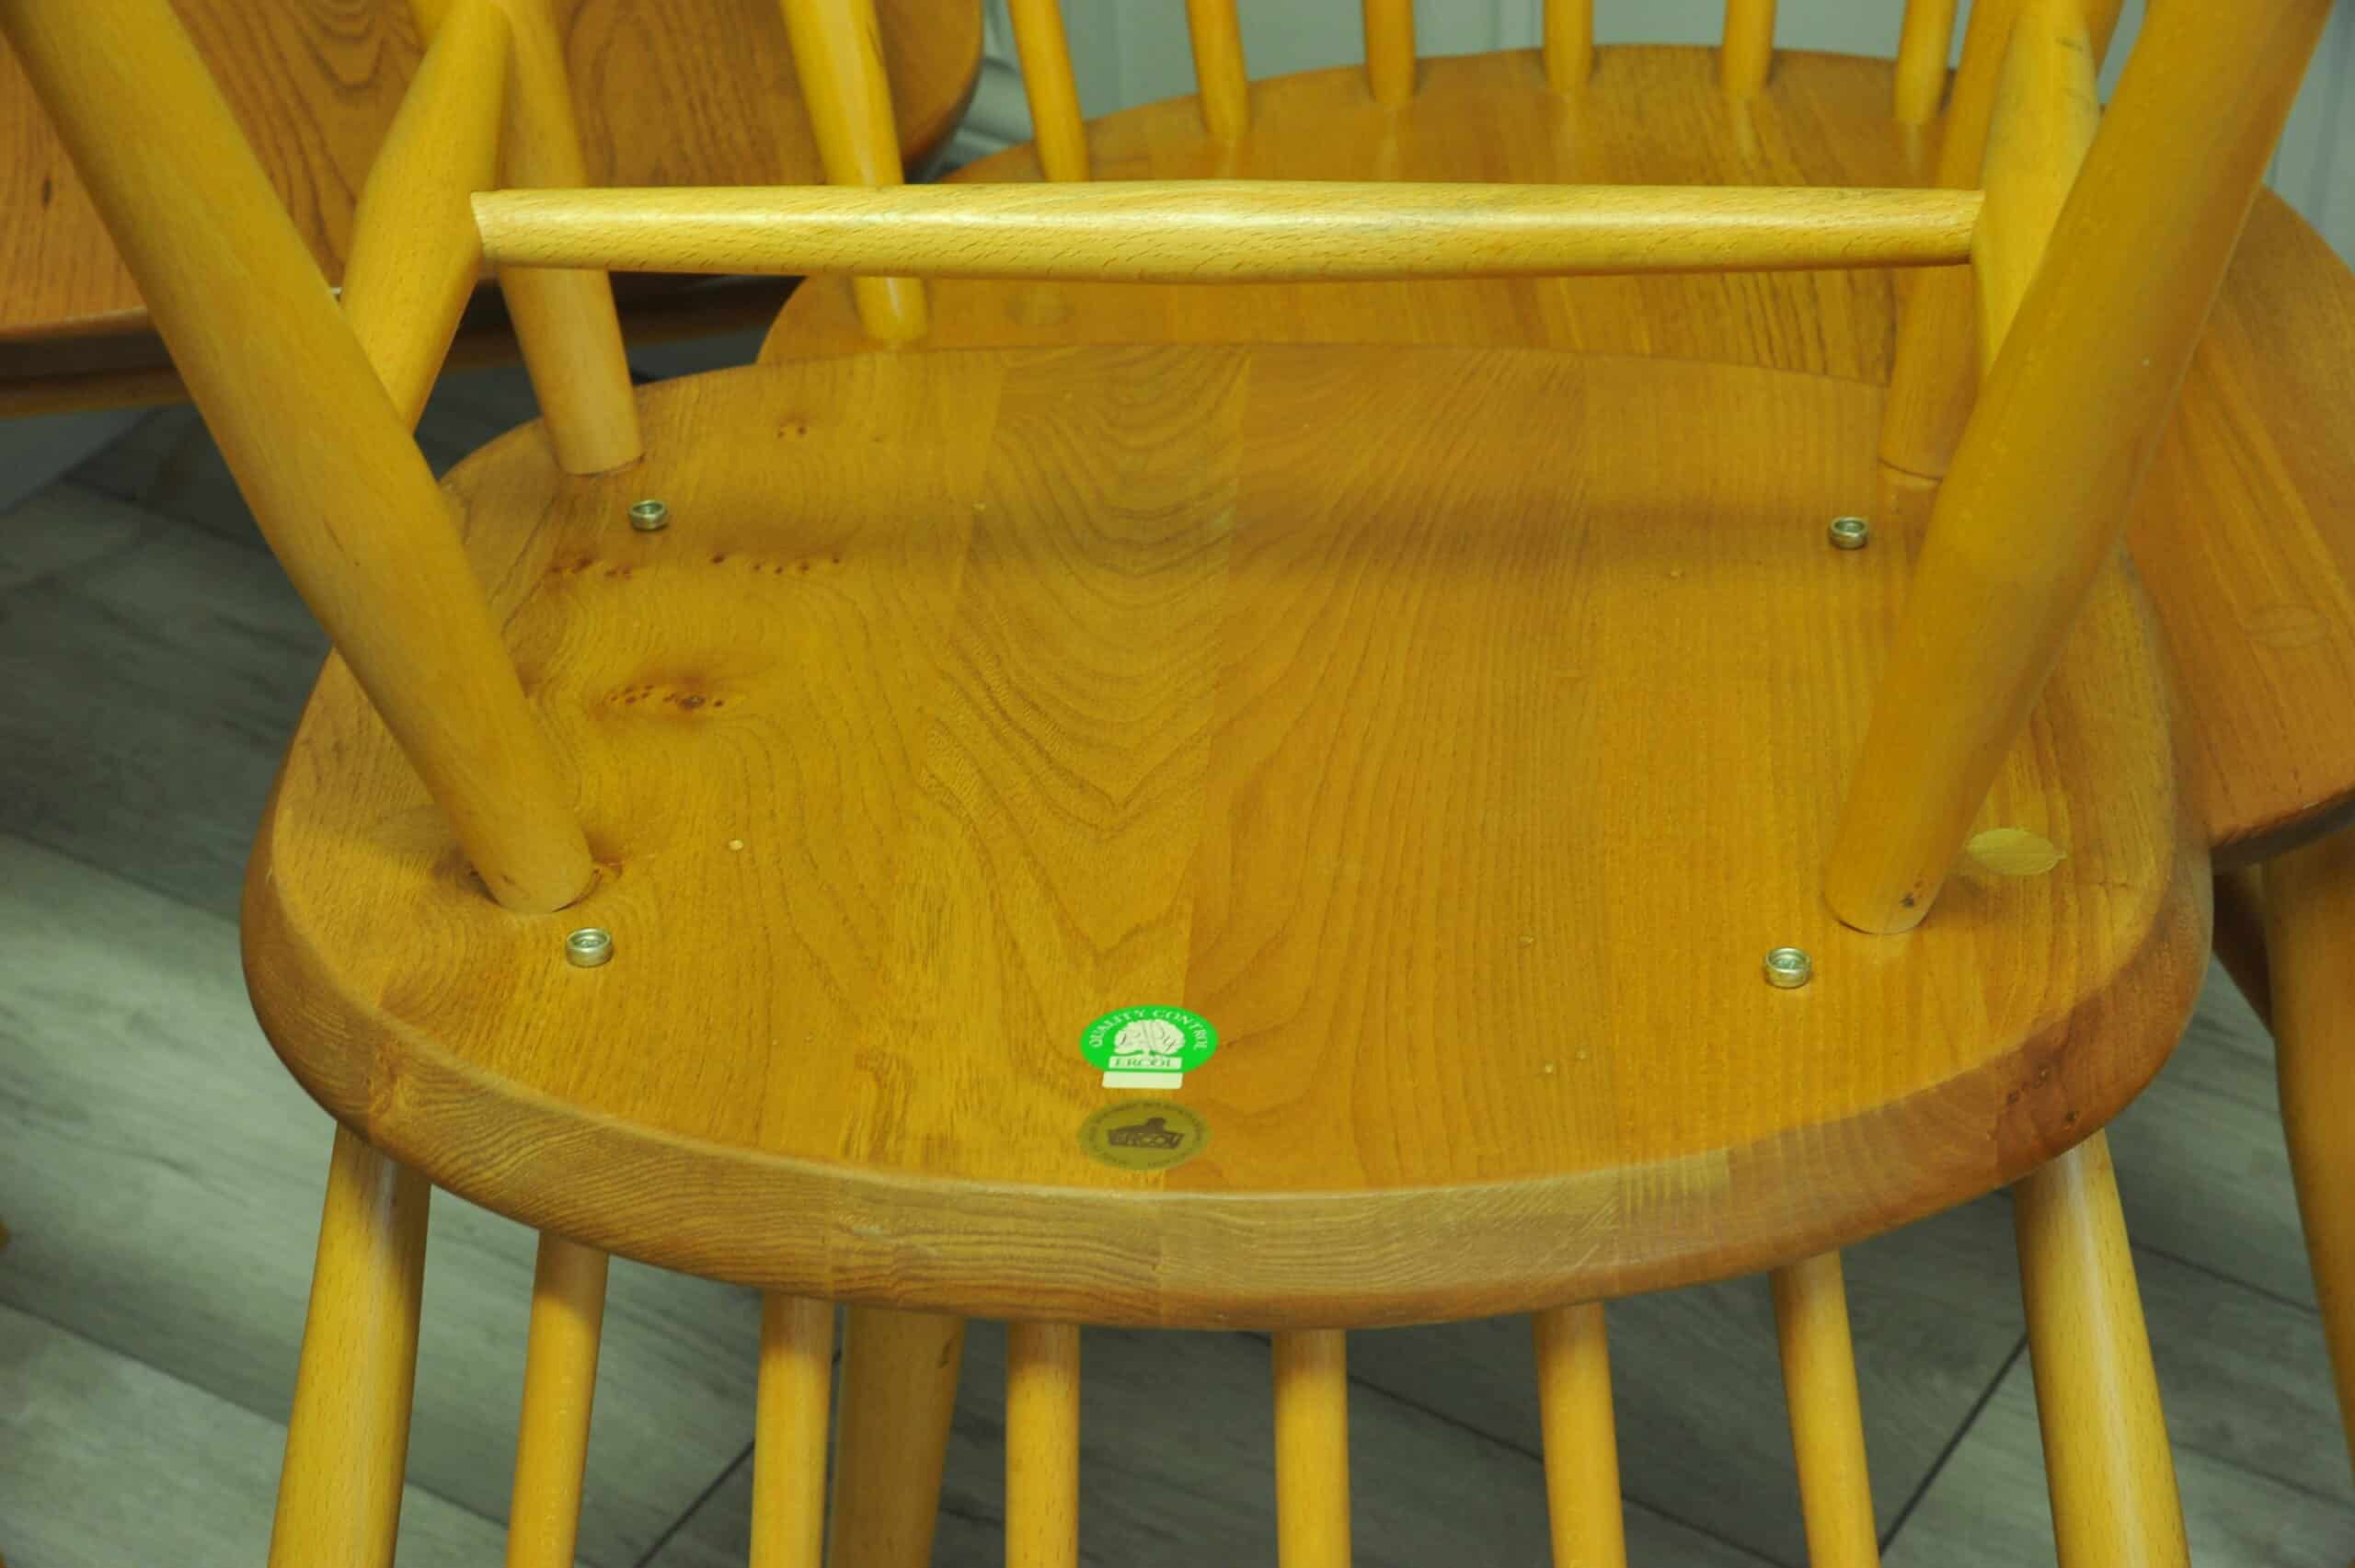 bottom of the ercol chairs displaying stamp